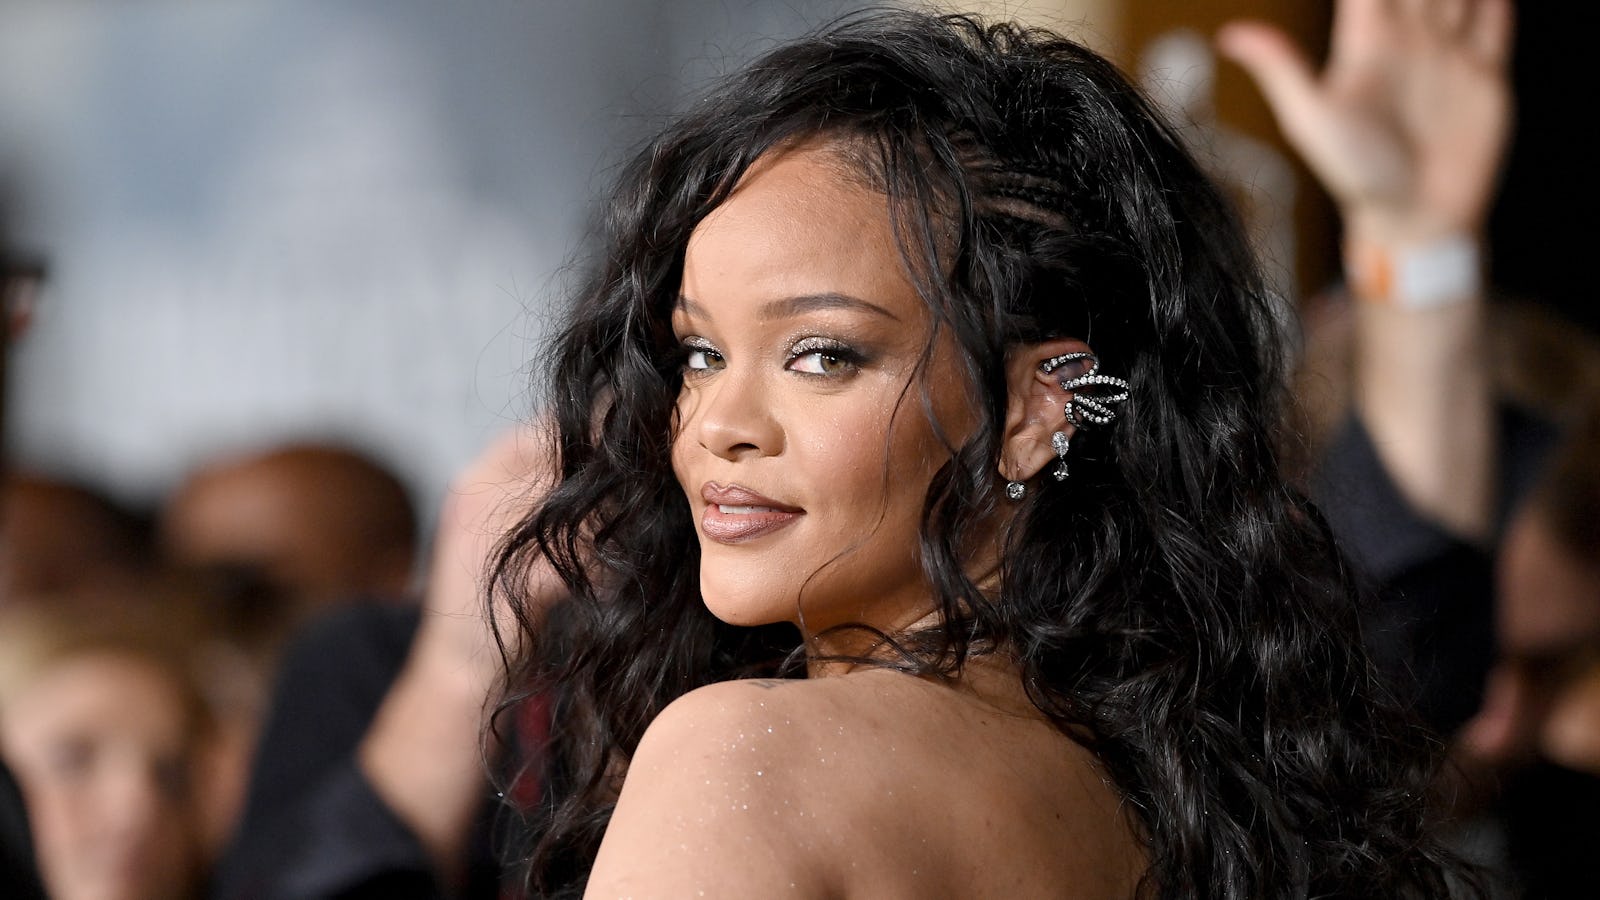 Rihanna’s Stunning Red Carpet Gown Was Styled So Differently From The Runway